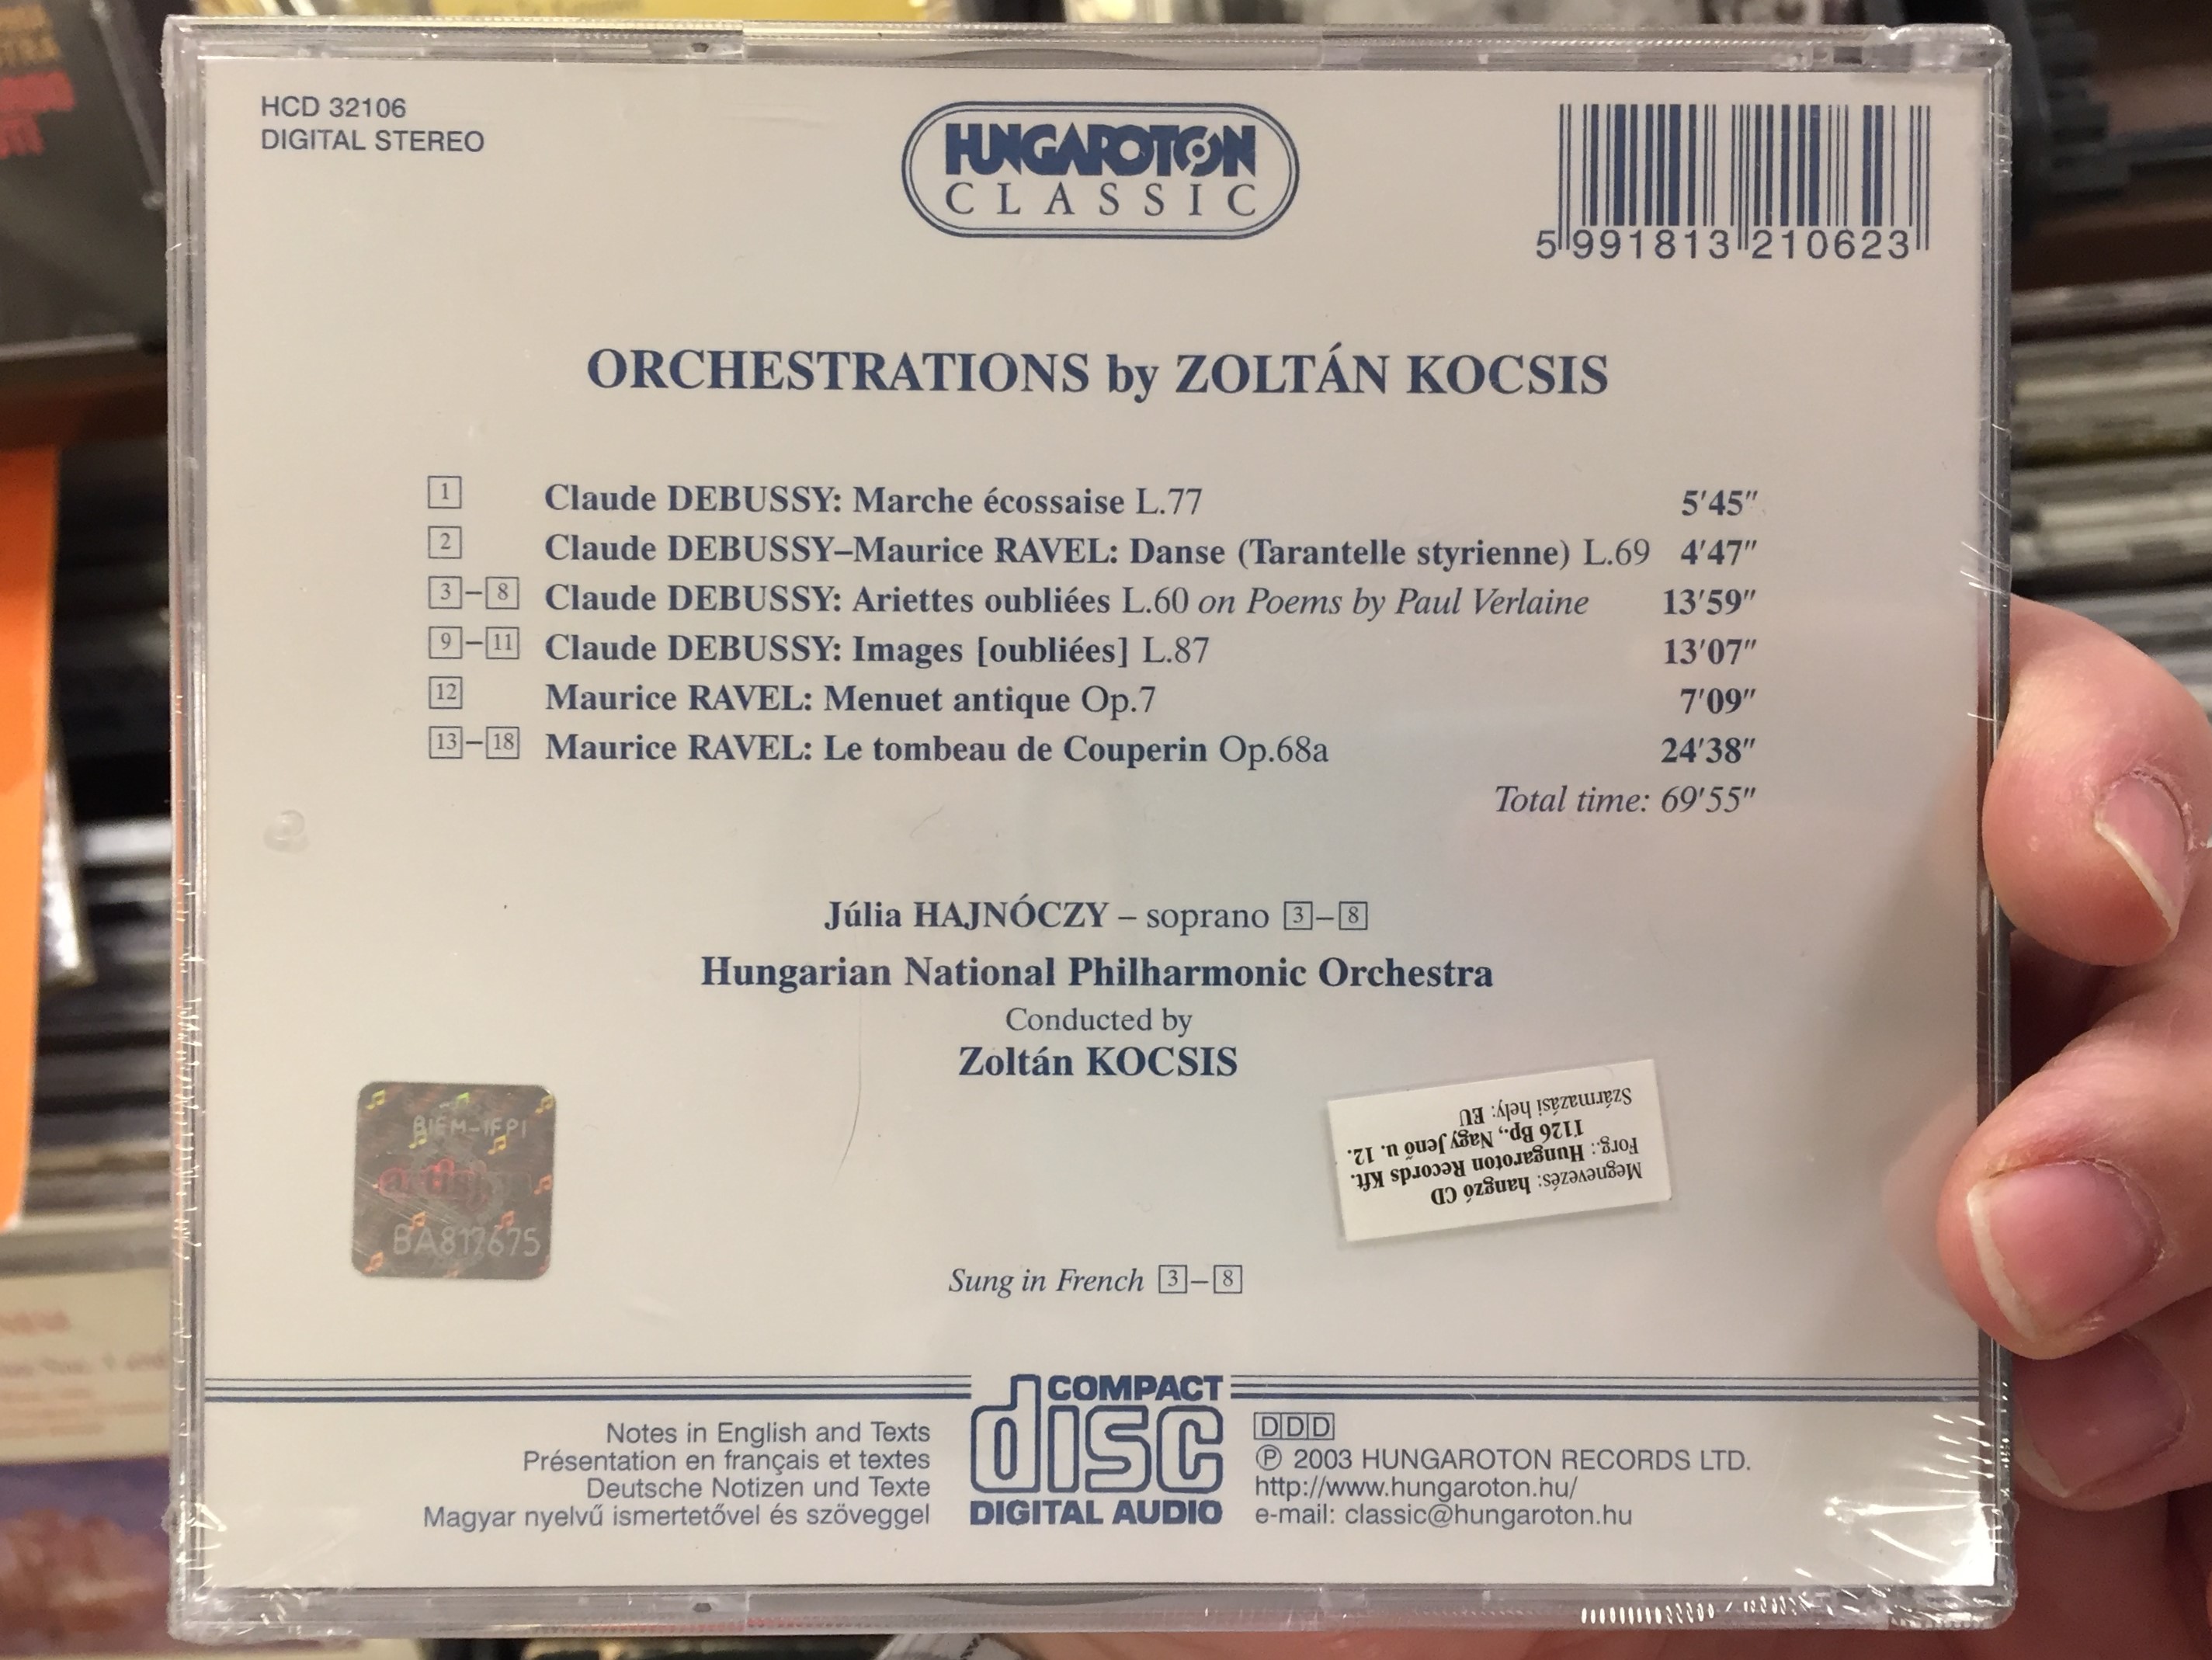 orchestrations-by-zoltan-kocsis-of-works-by-debussy-and-ravel-julia-halnoczy-soprano-hungarian-national-philharmonic-orchestra-conducted-by-zoltan-kocsis-hungaroton-classic-audio-cd-2003-.jpg